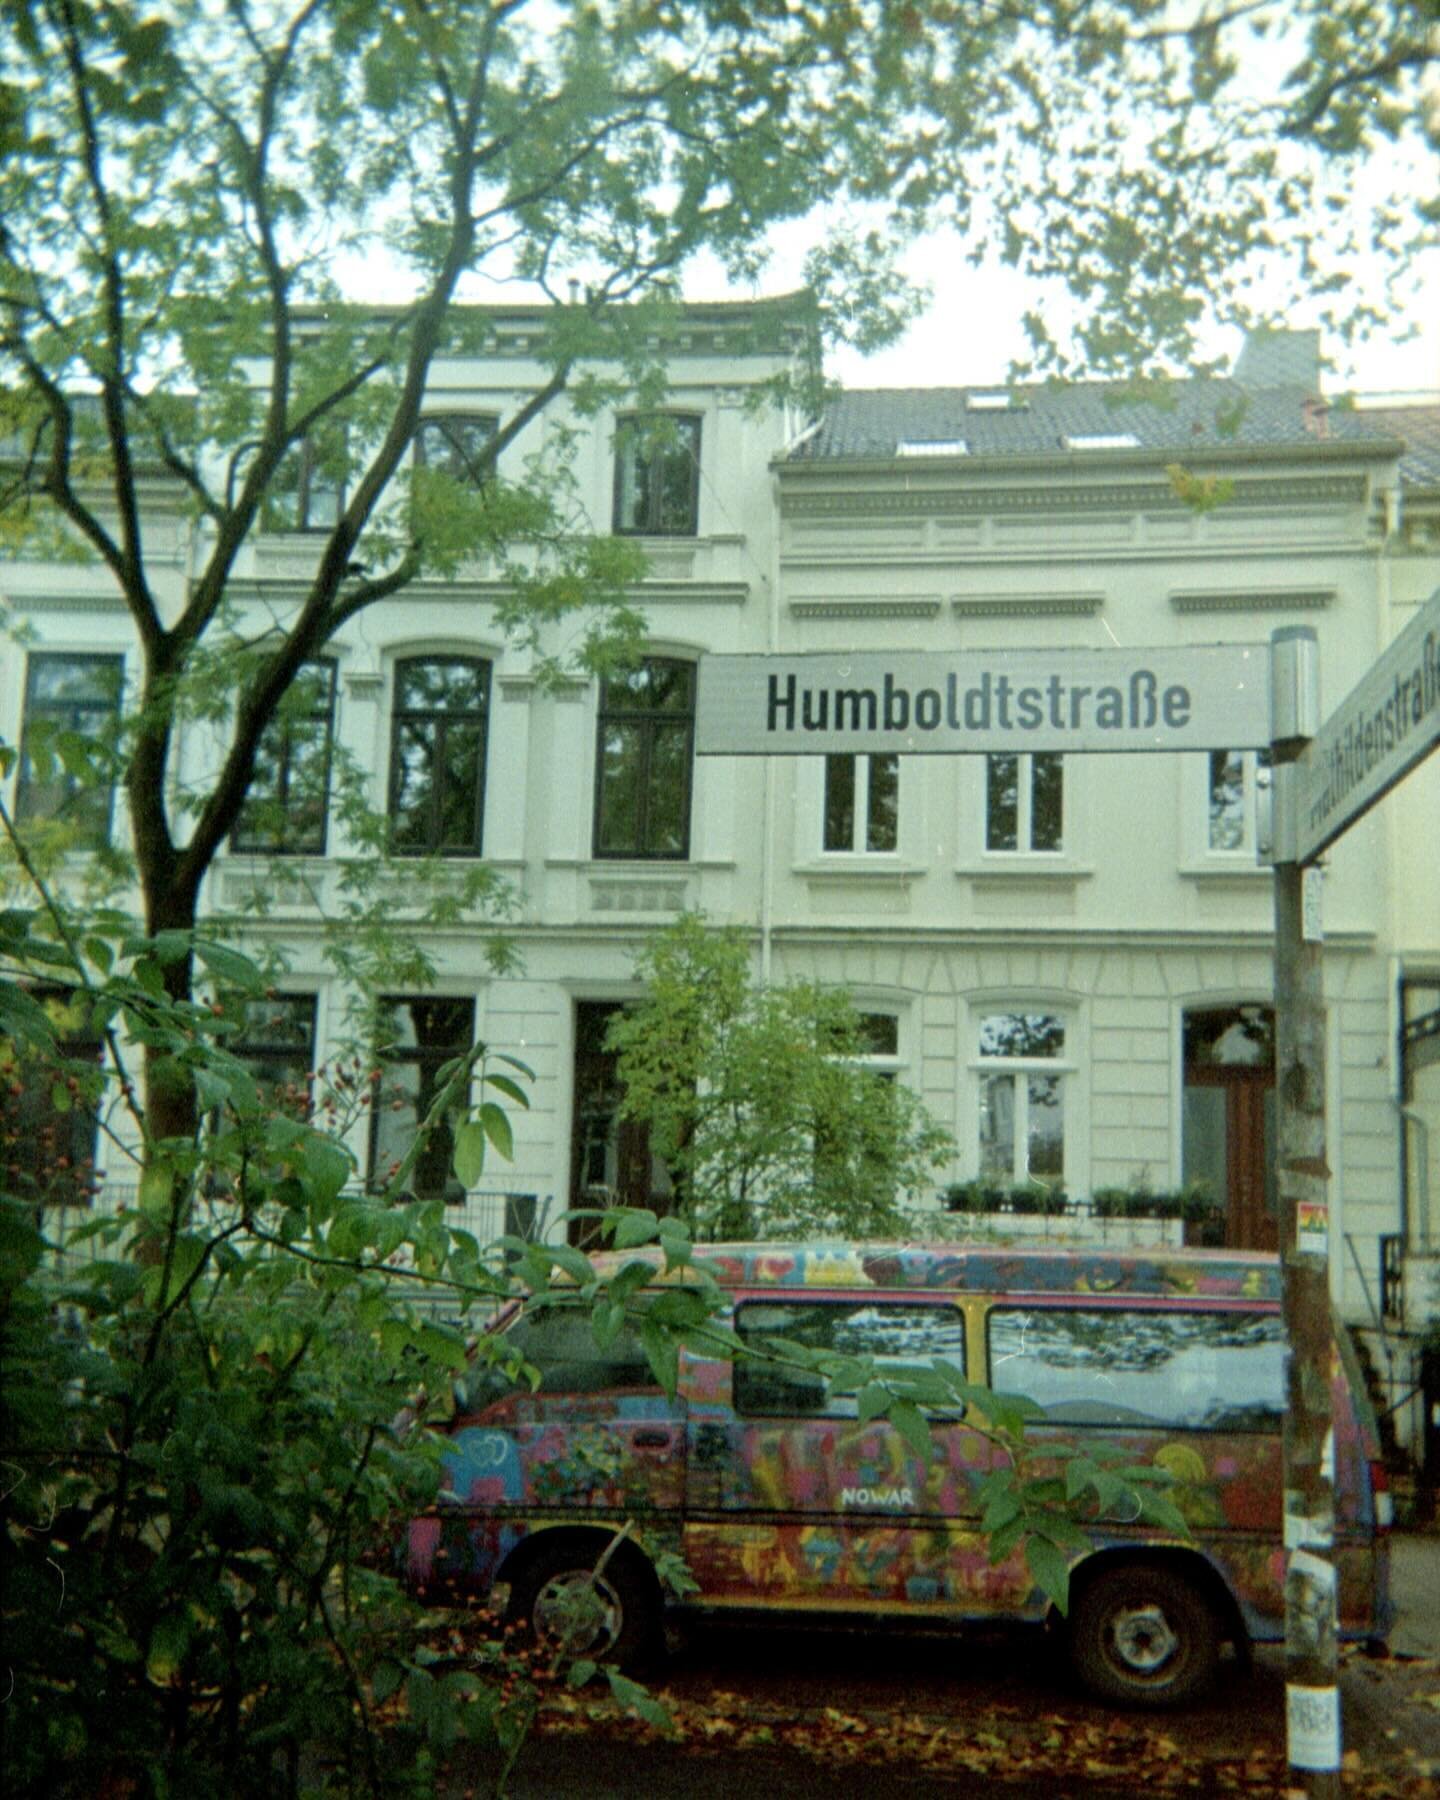 my album &ldquo;Humboldt Street&rdquo; will be here in 10 days! I recently took a series of photos on this special street to represent each song on the album and their connection to Humboldtstra&szlig;e. I&rsquo;ll be introducing each of the 8 tracks